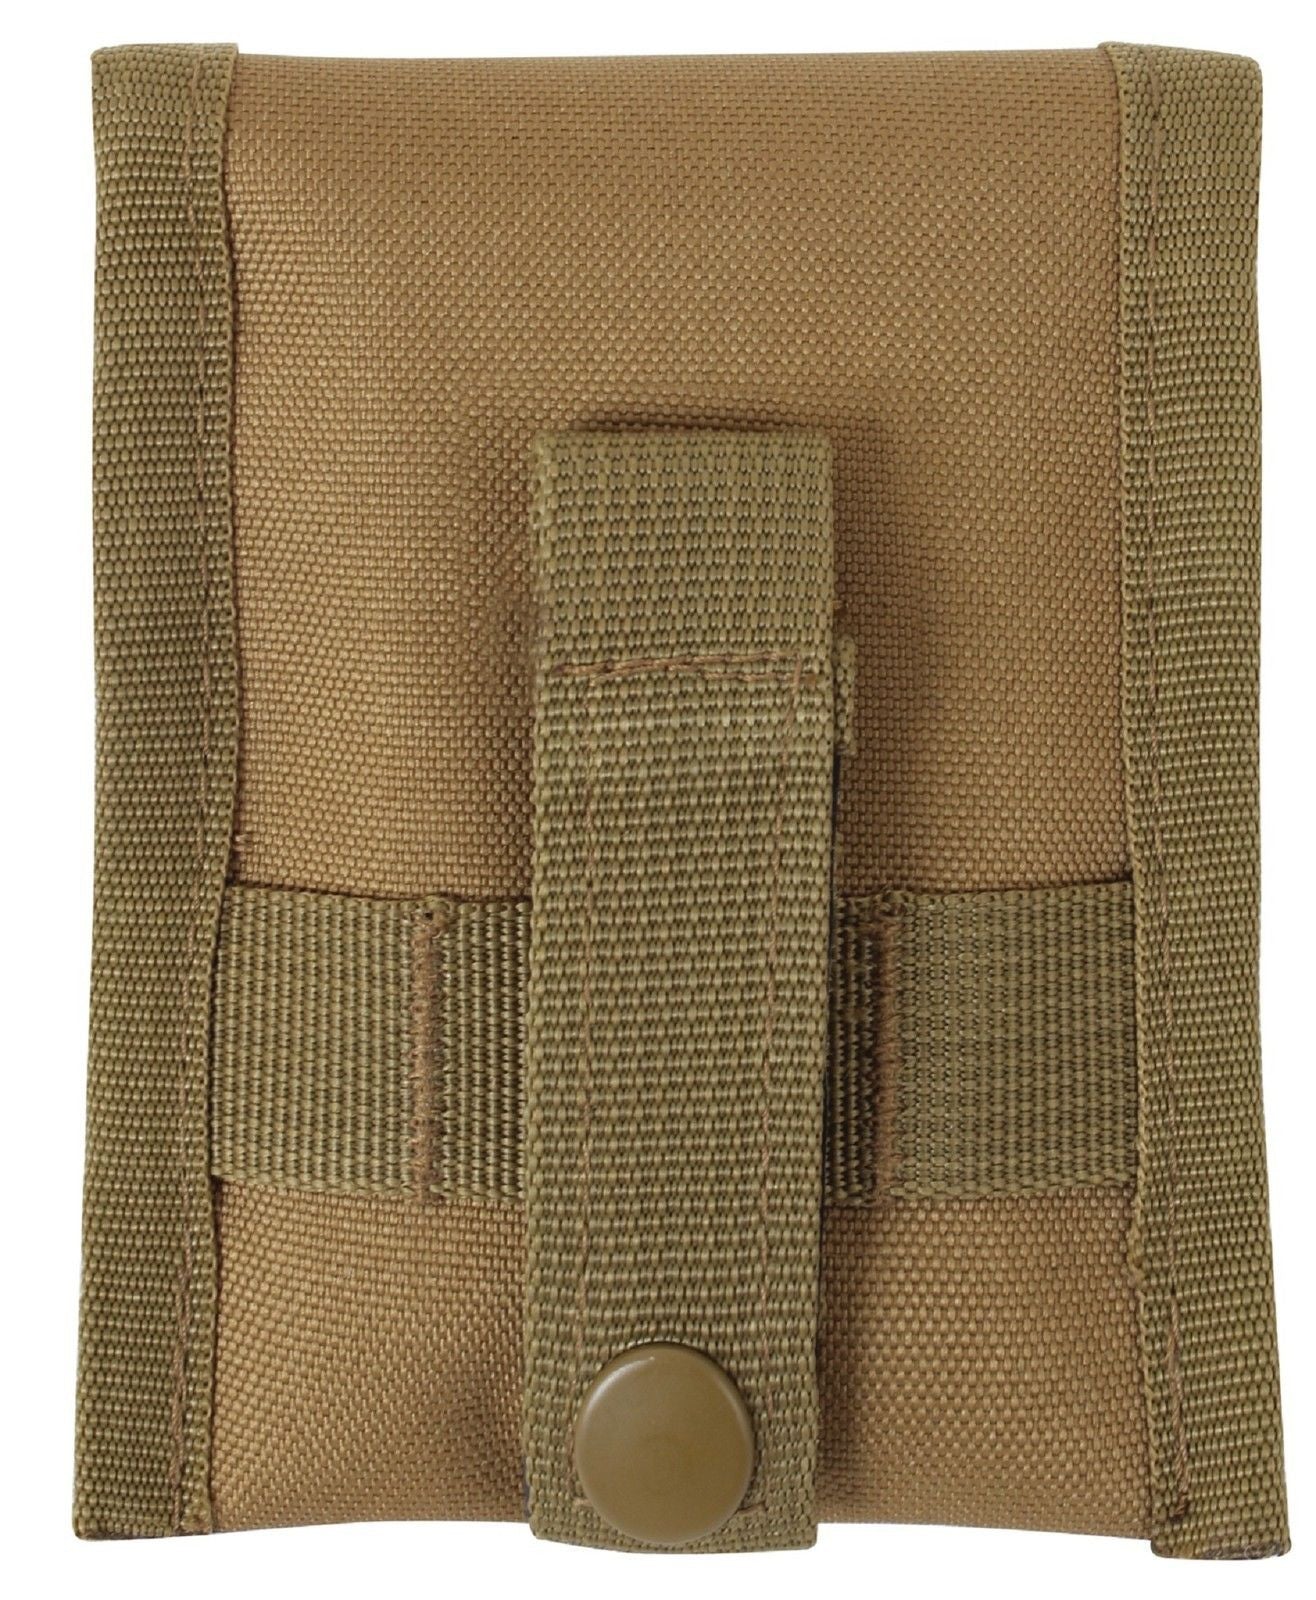 Coyote Brown MOLLE Compatible Compass Pouch - Rothco 5" Gadget Pouches